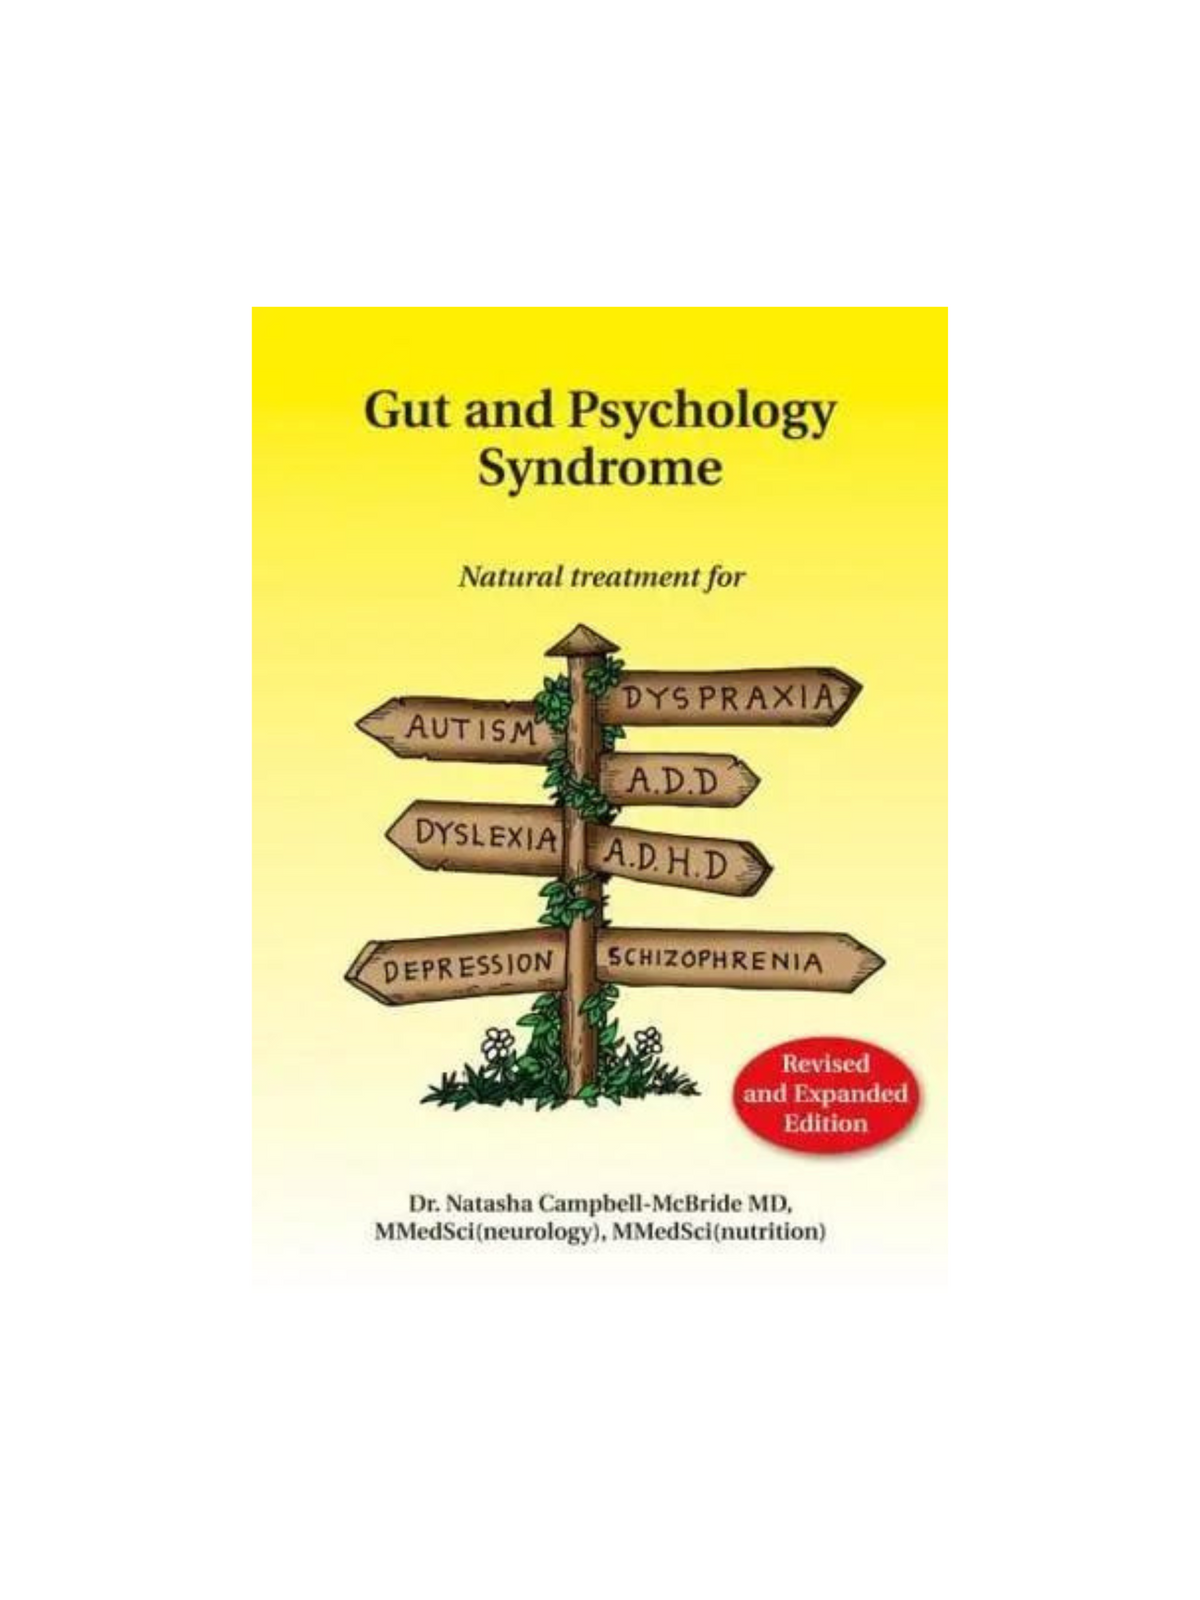 Gut and Psychology Syndrome: Natural Treatment for Autism,  Dyspraxia, A.D.D., Dyslexia, A.D.H.D., Depression, Schizophrenia, 2nd Edition Book